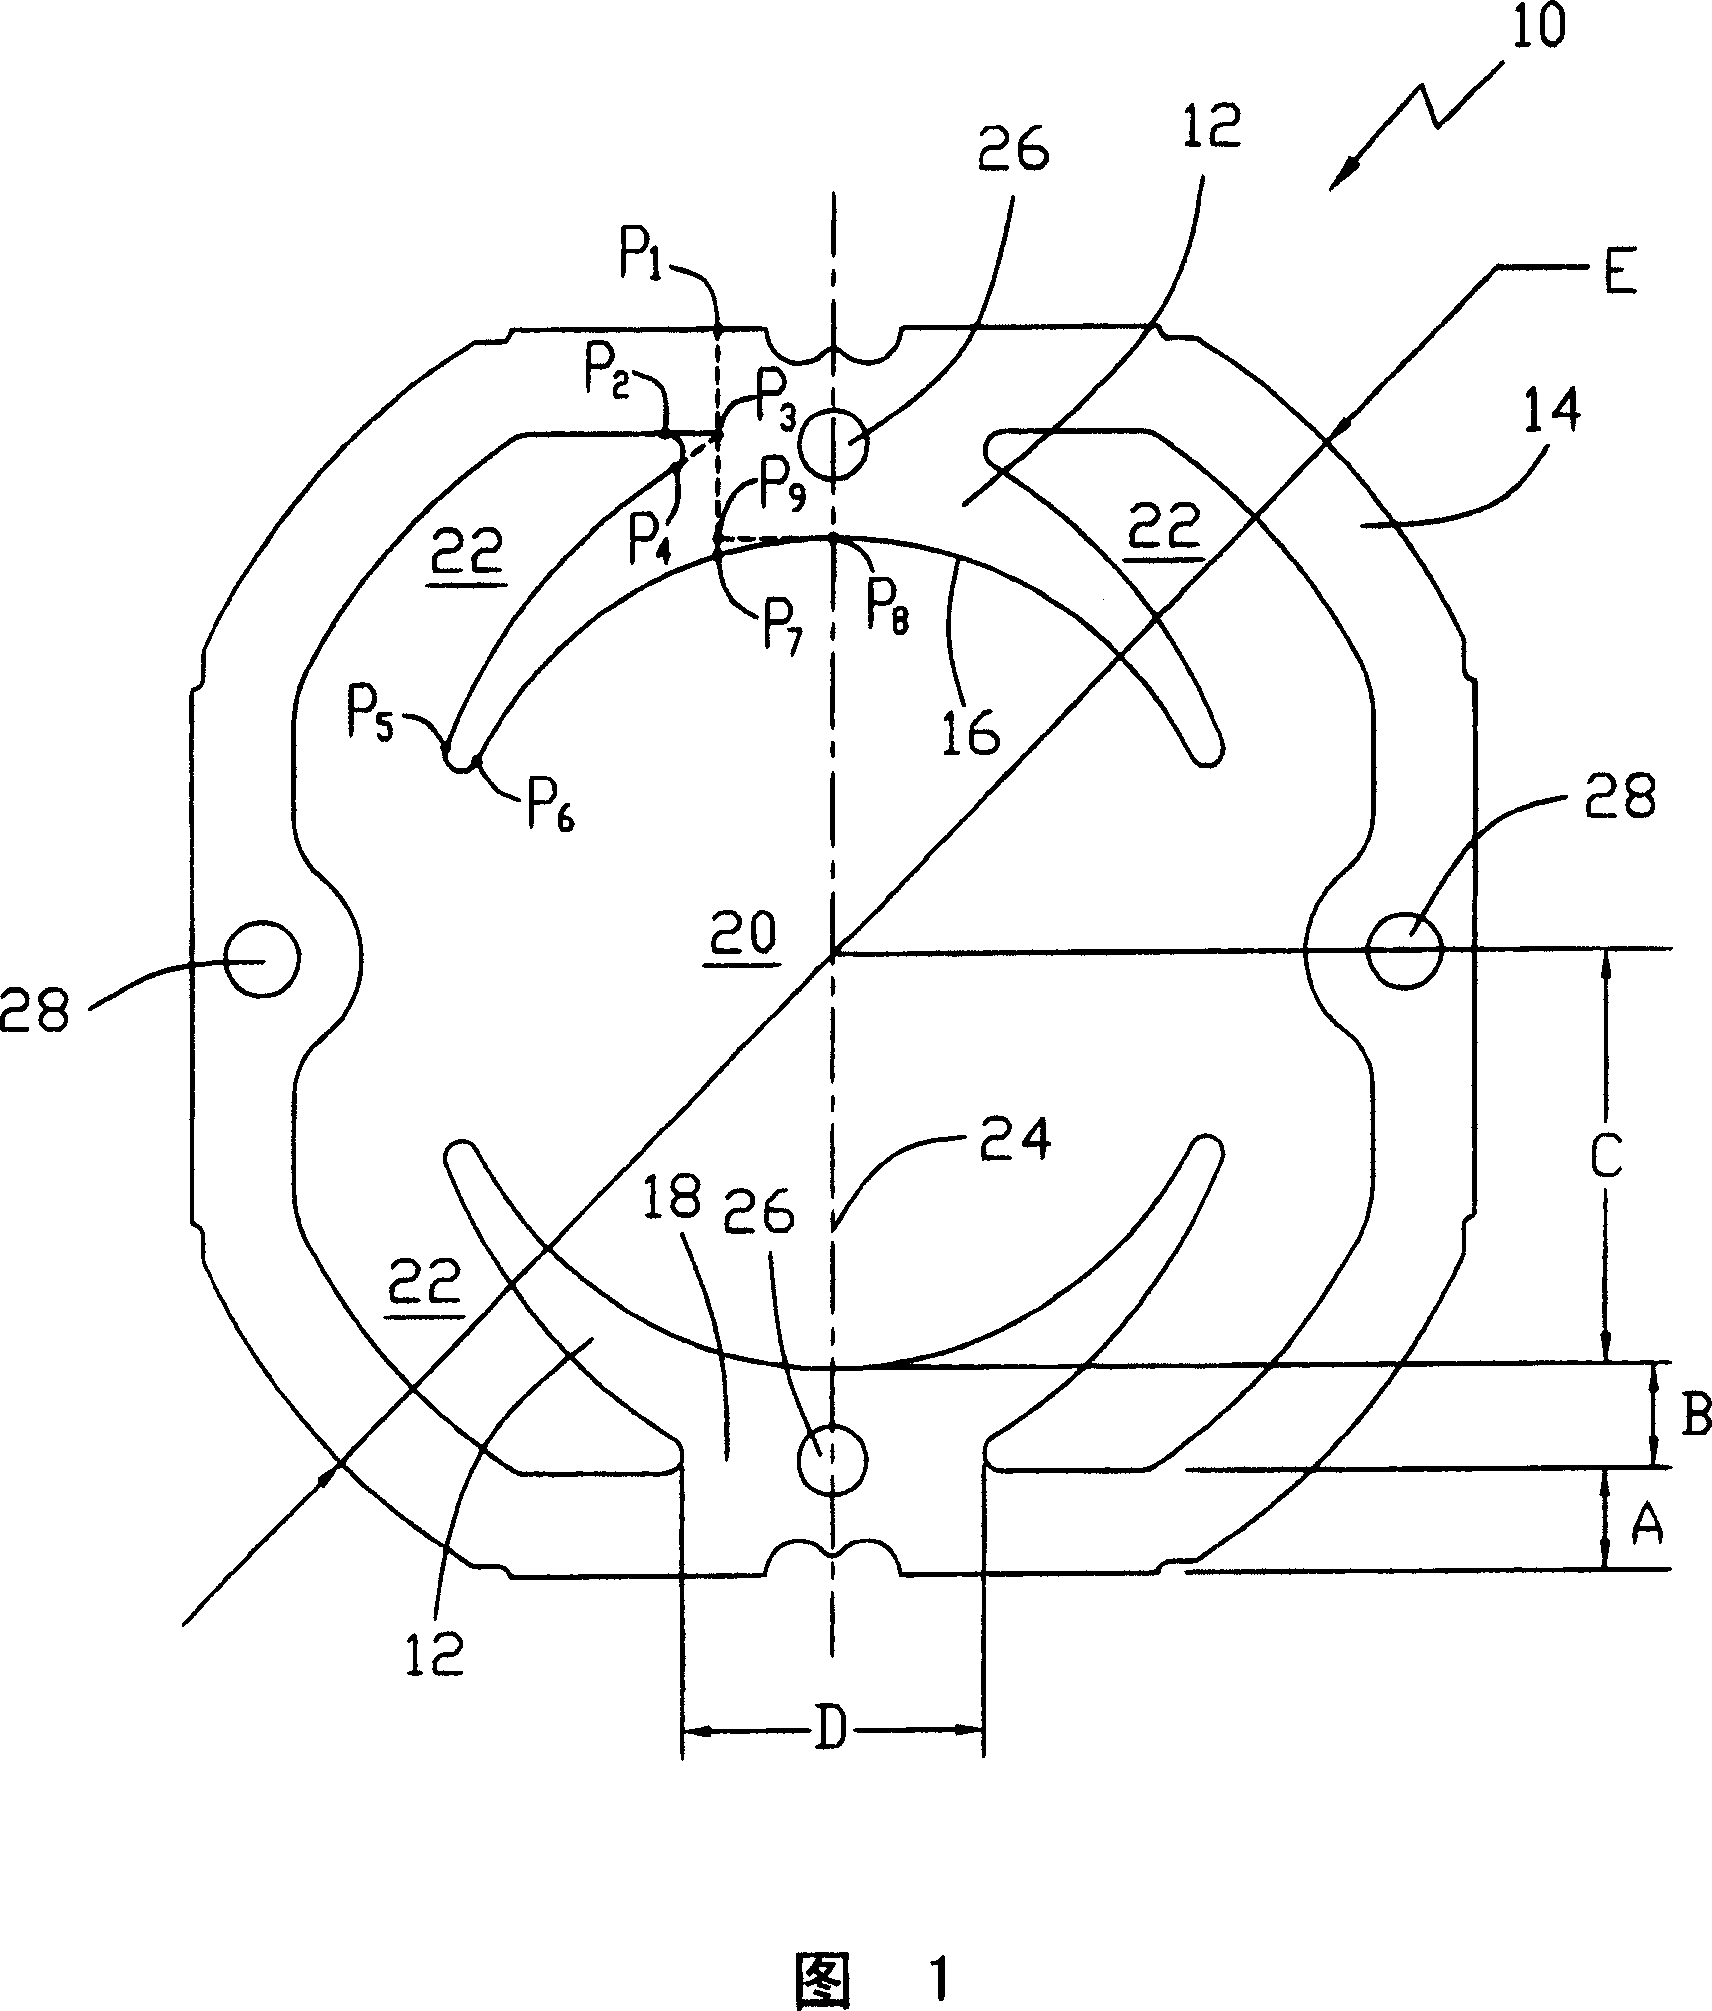 General motor and its stator lamination